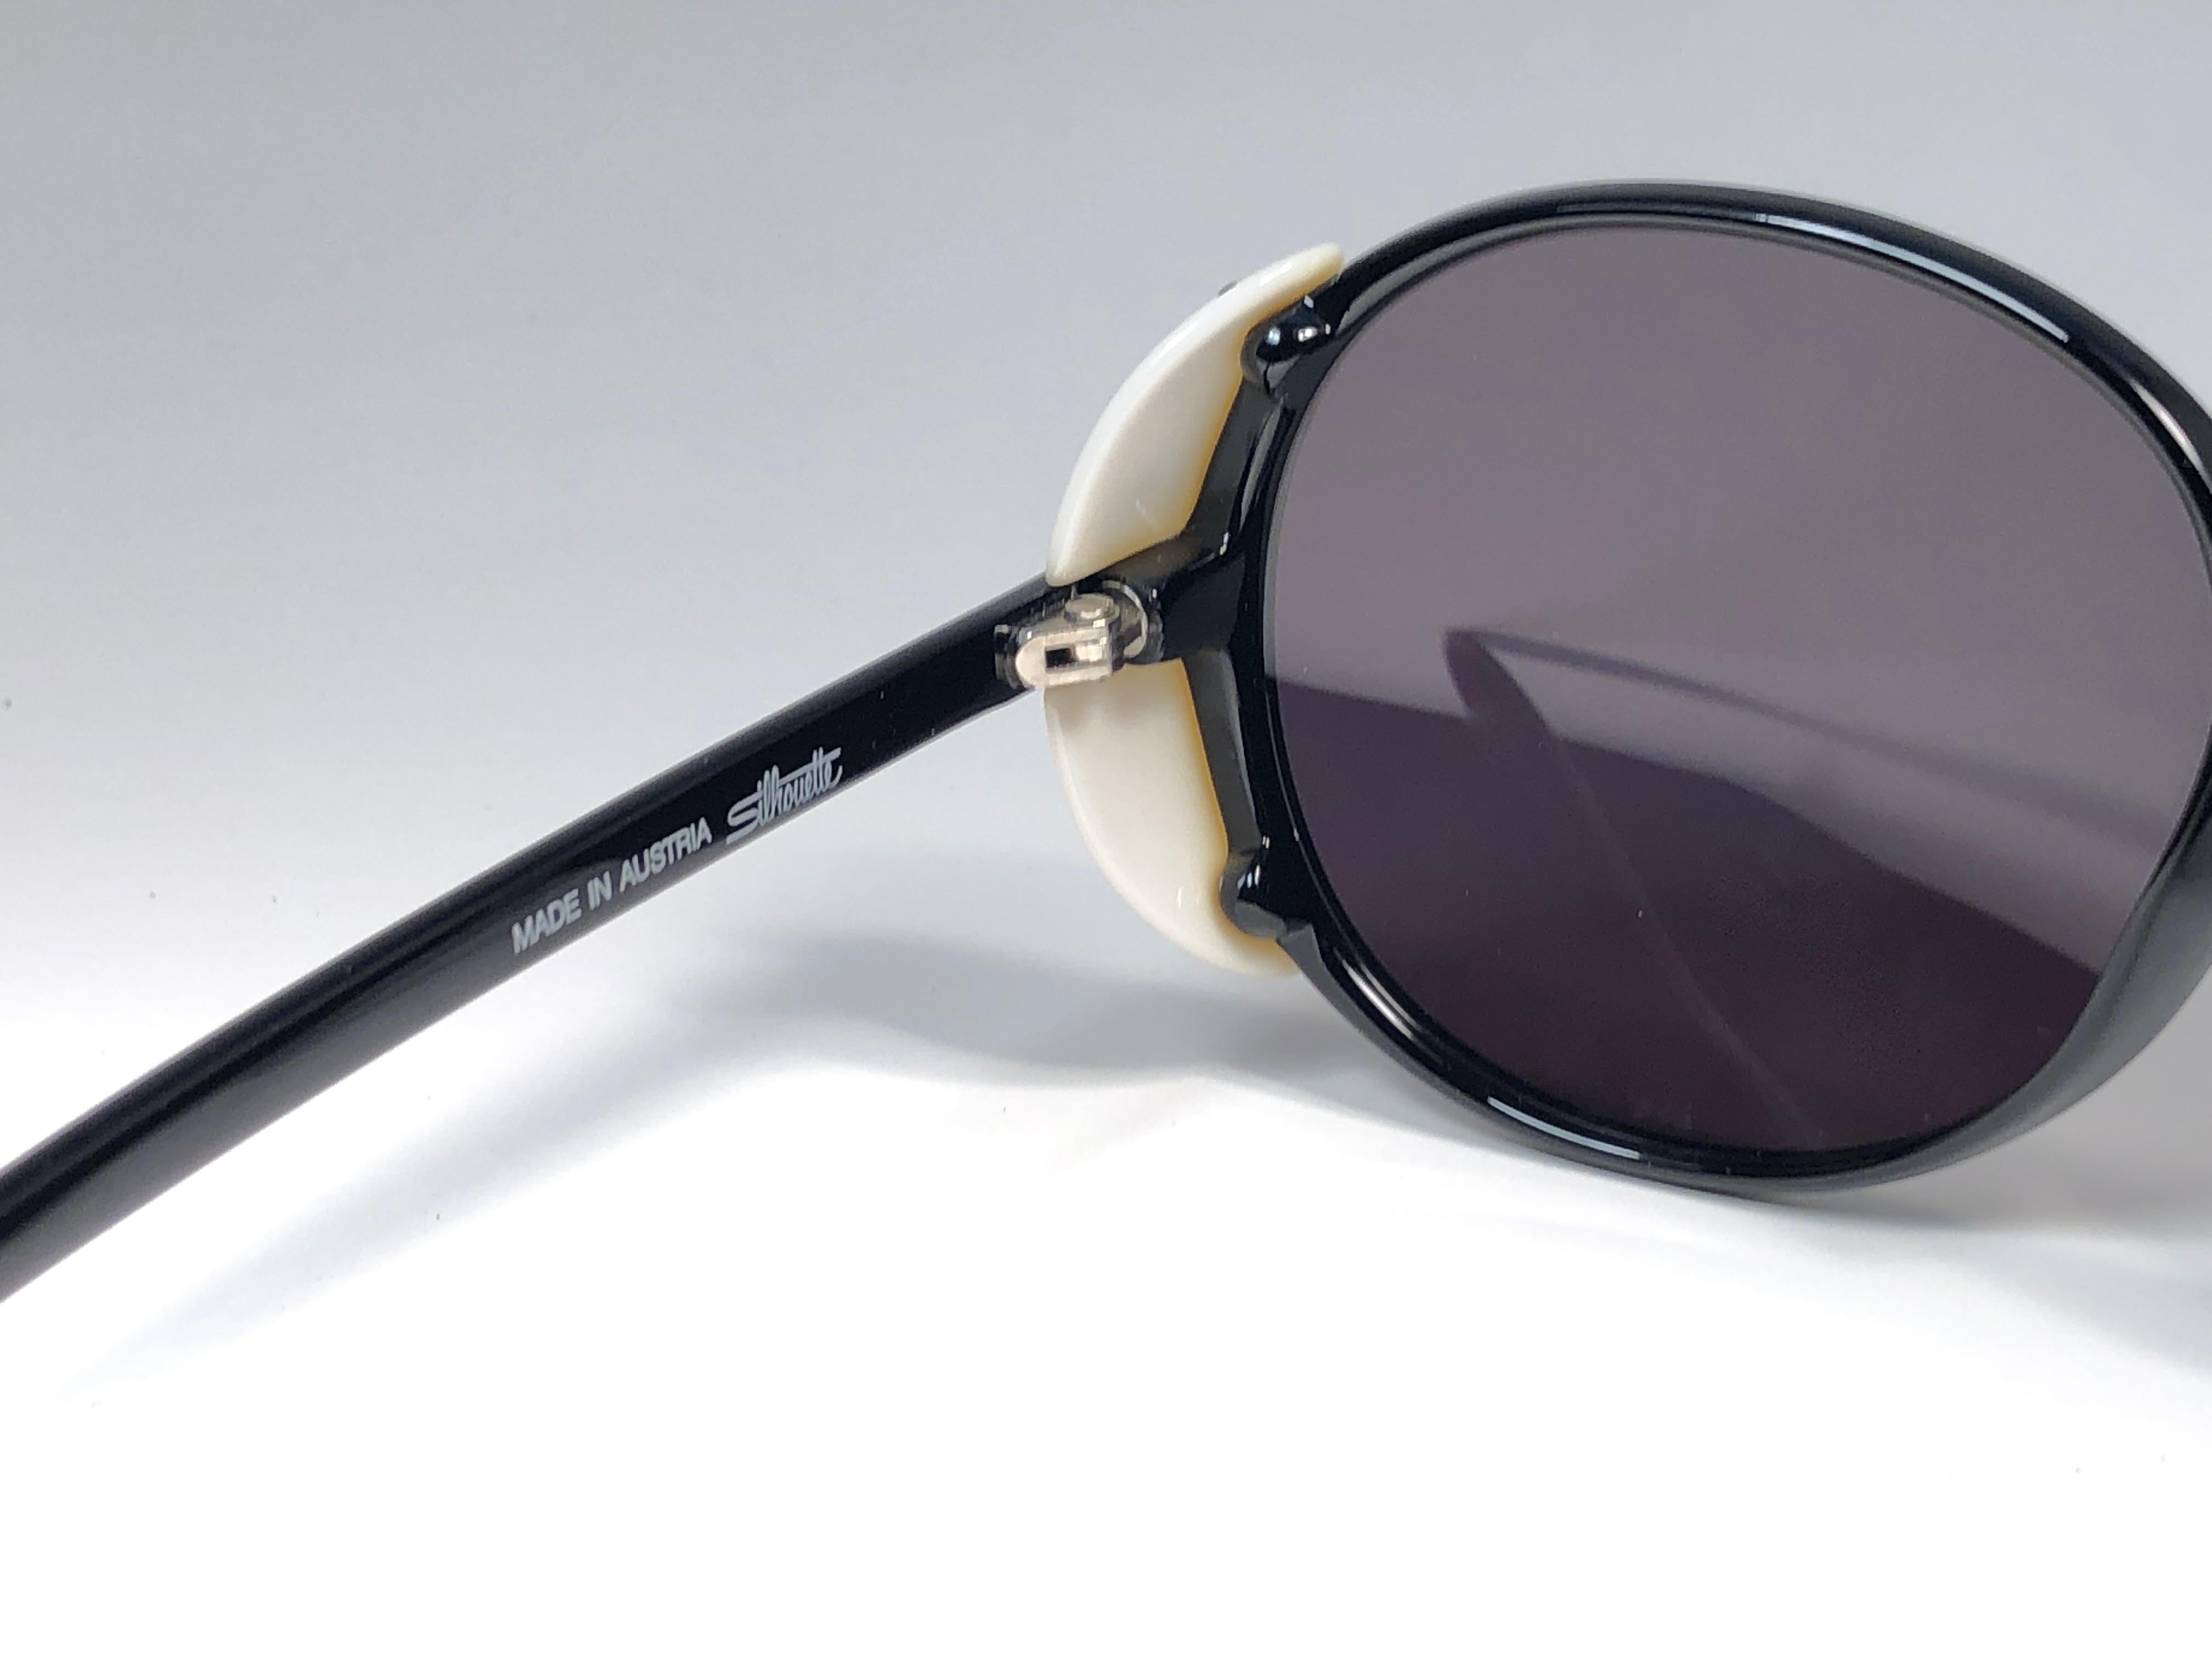 New Vintage Silhouette M3053 C Black & White 1980's Sunglasses In New Condition For Sale In Baleares, Baleares